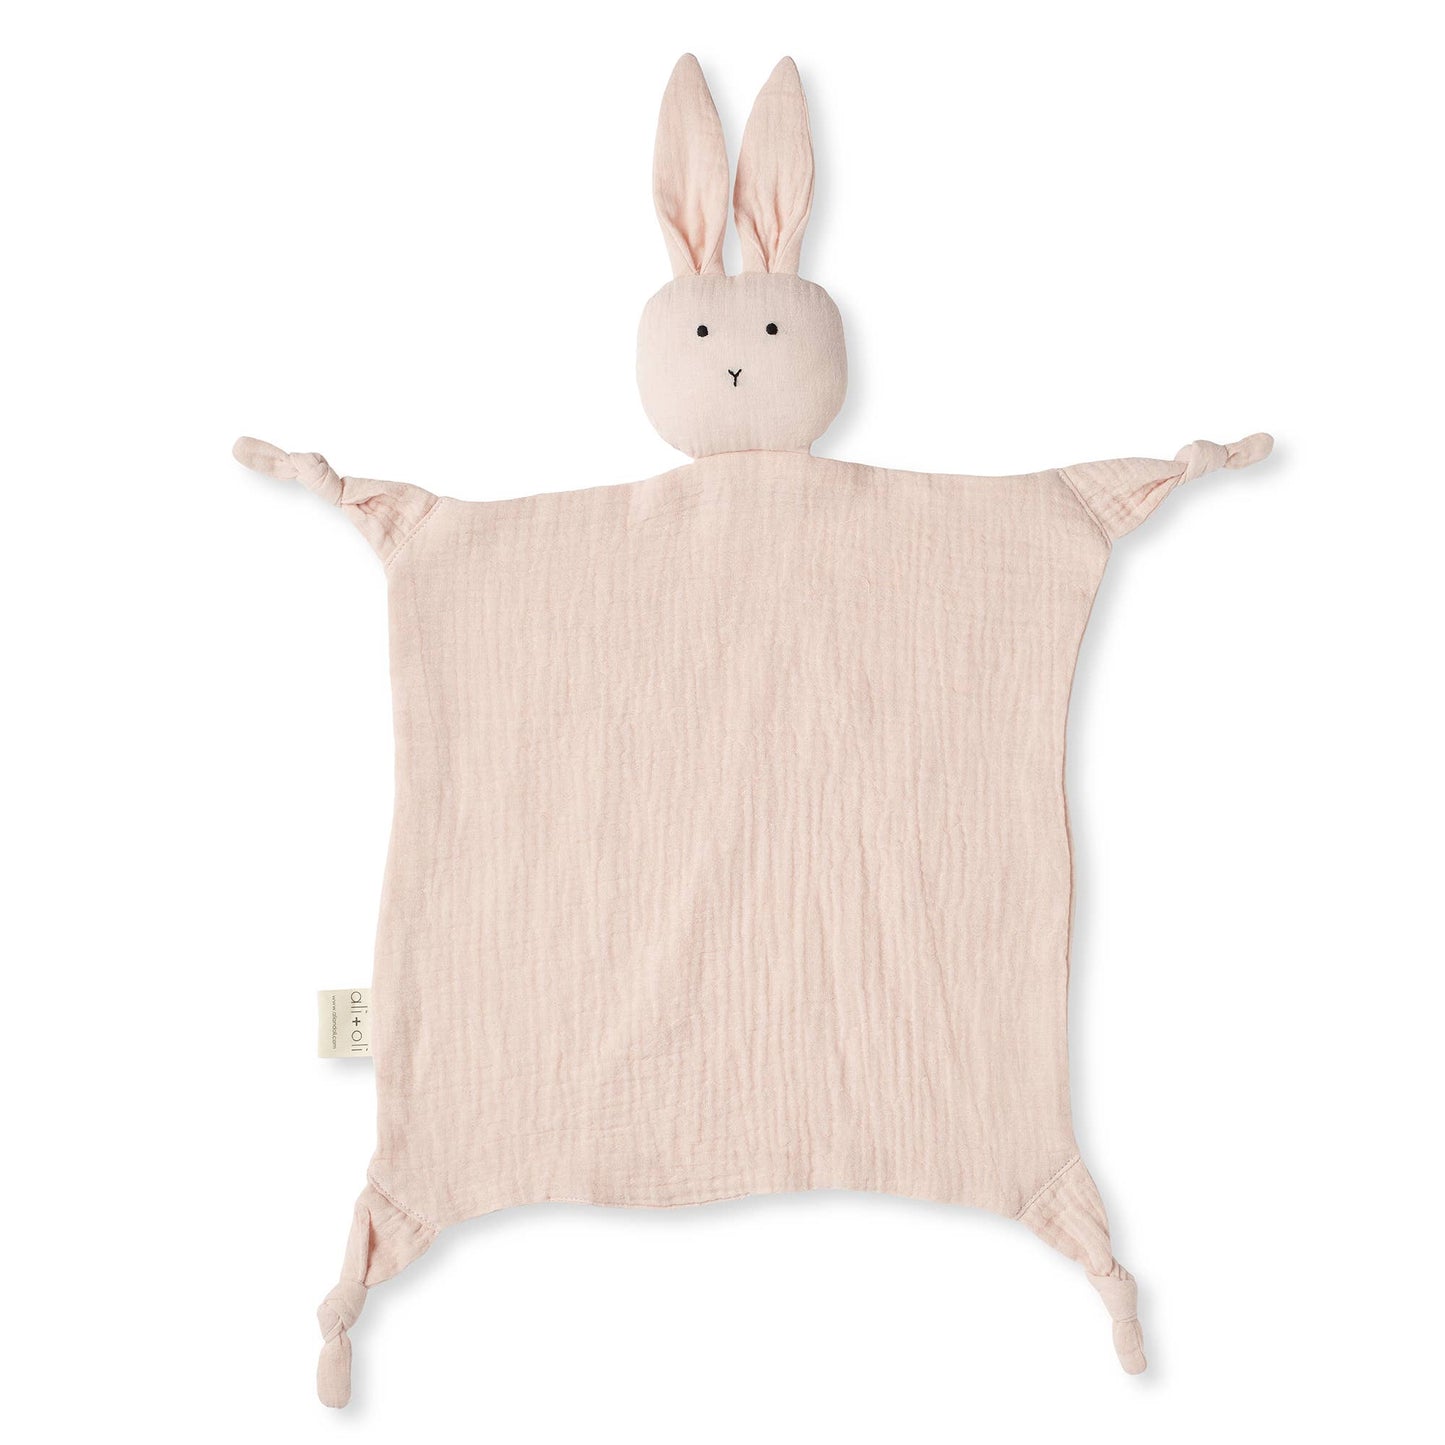 Cuddle Security Blanket Soft Muslin Cotton - Bunny (Pink) - The Brass Bee